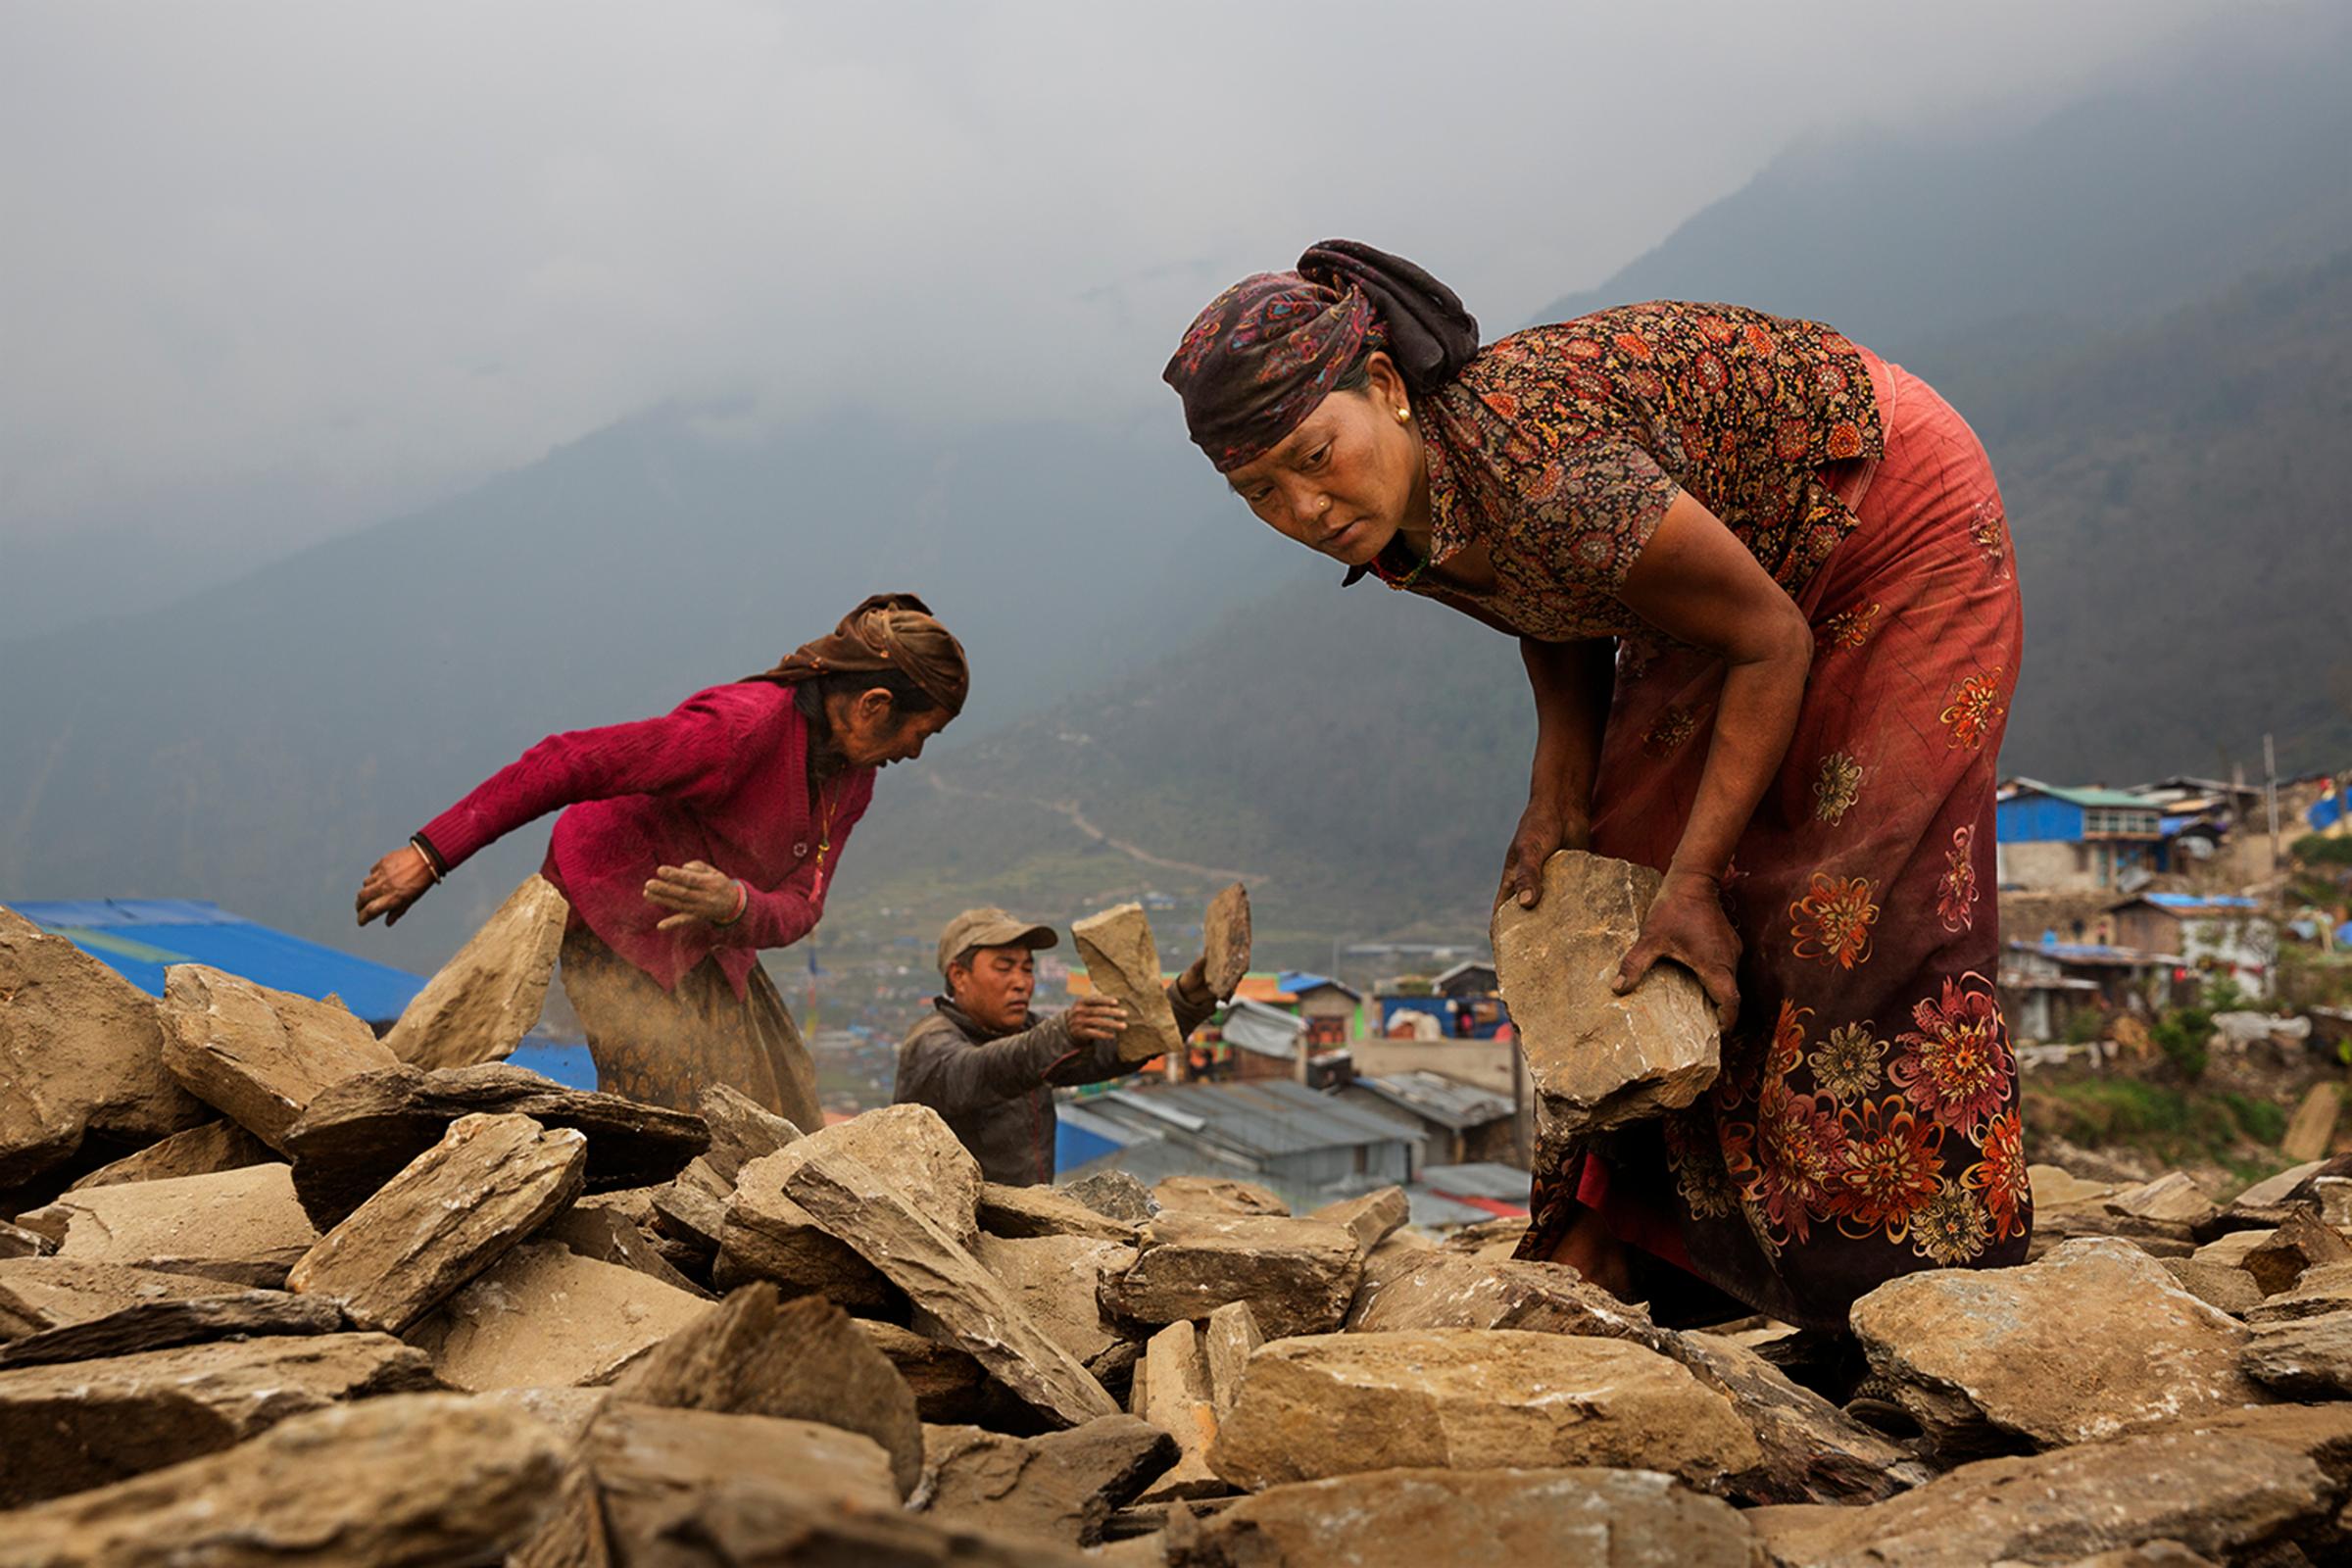 Nearly a year after Nepal's earthquakes of 2015, villagers work at rebuilding with little or no government support, Barpak, Nepal, April 3, 2016.